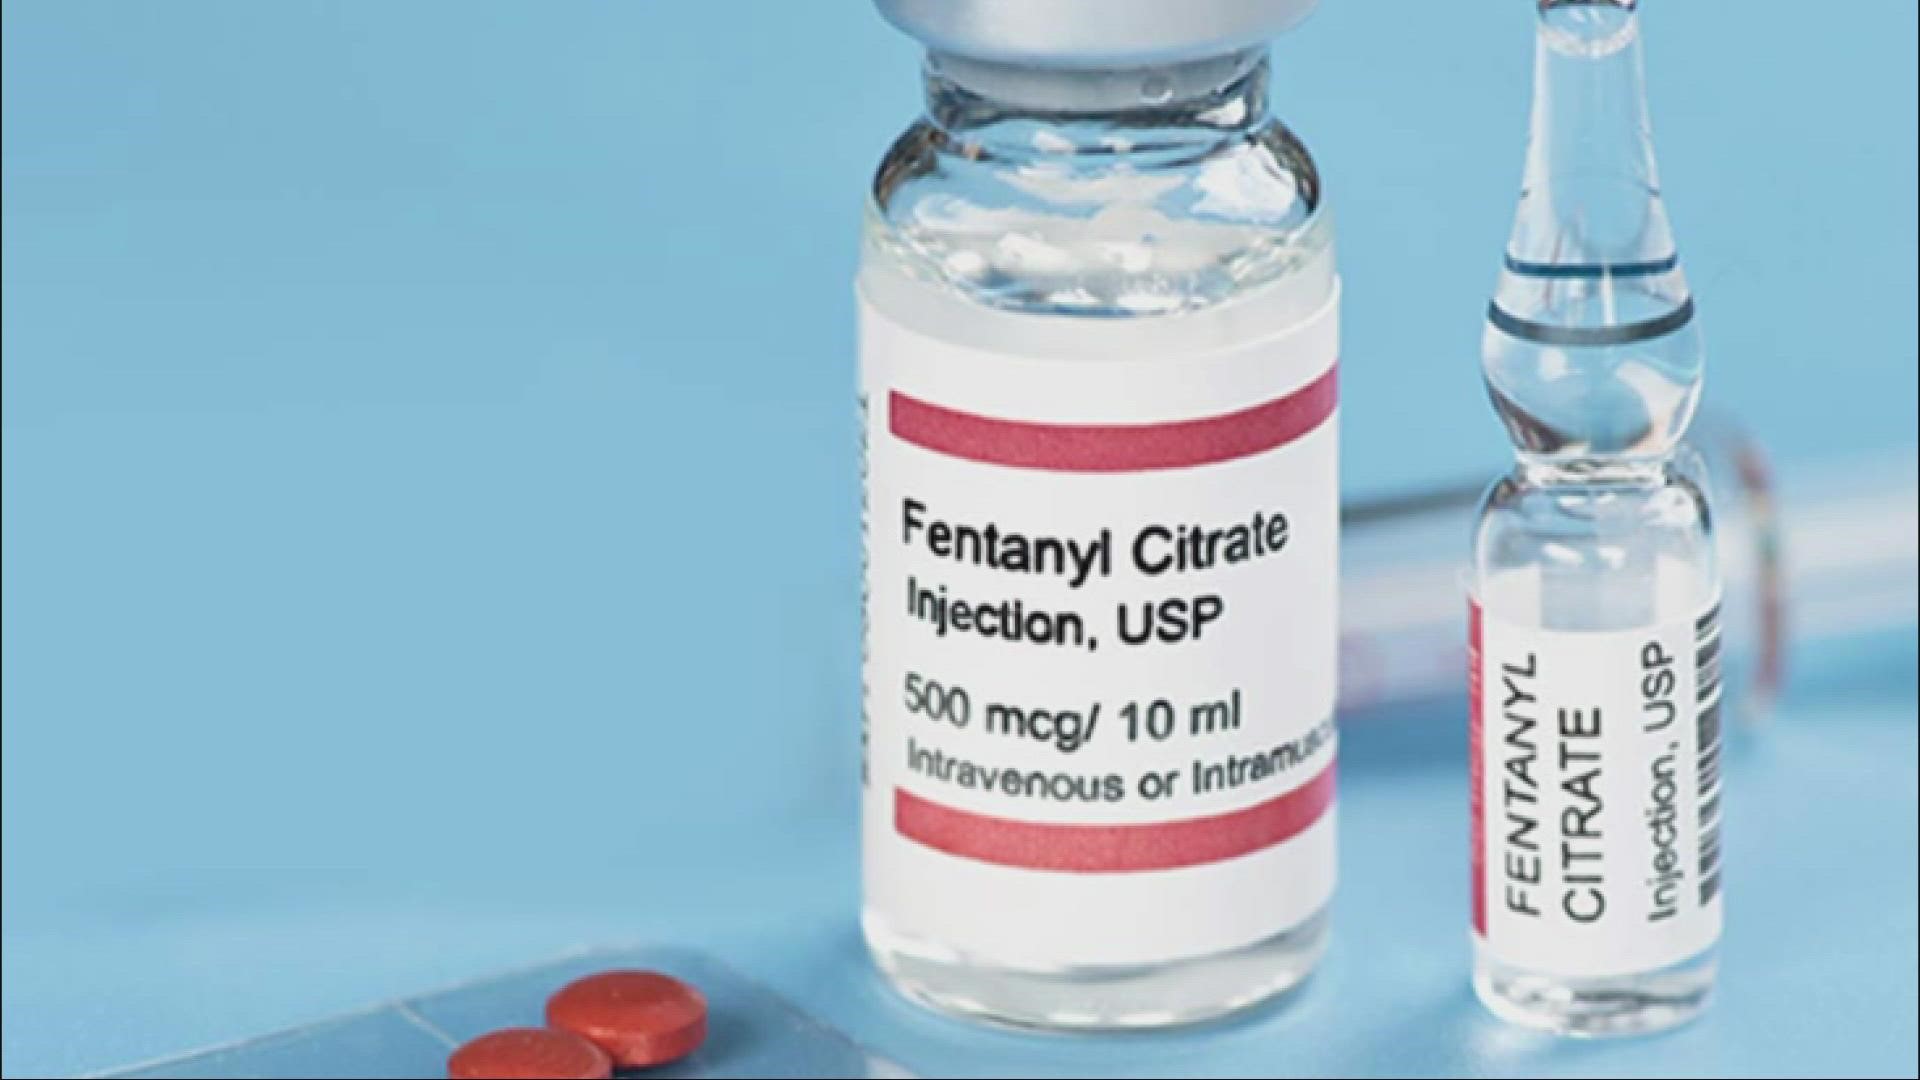 Both agencies say fentanyl is being mixed with all street drugs, including cocaine, methamphetamine, pressed (counterfeit) pills, and heroin.